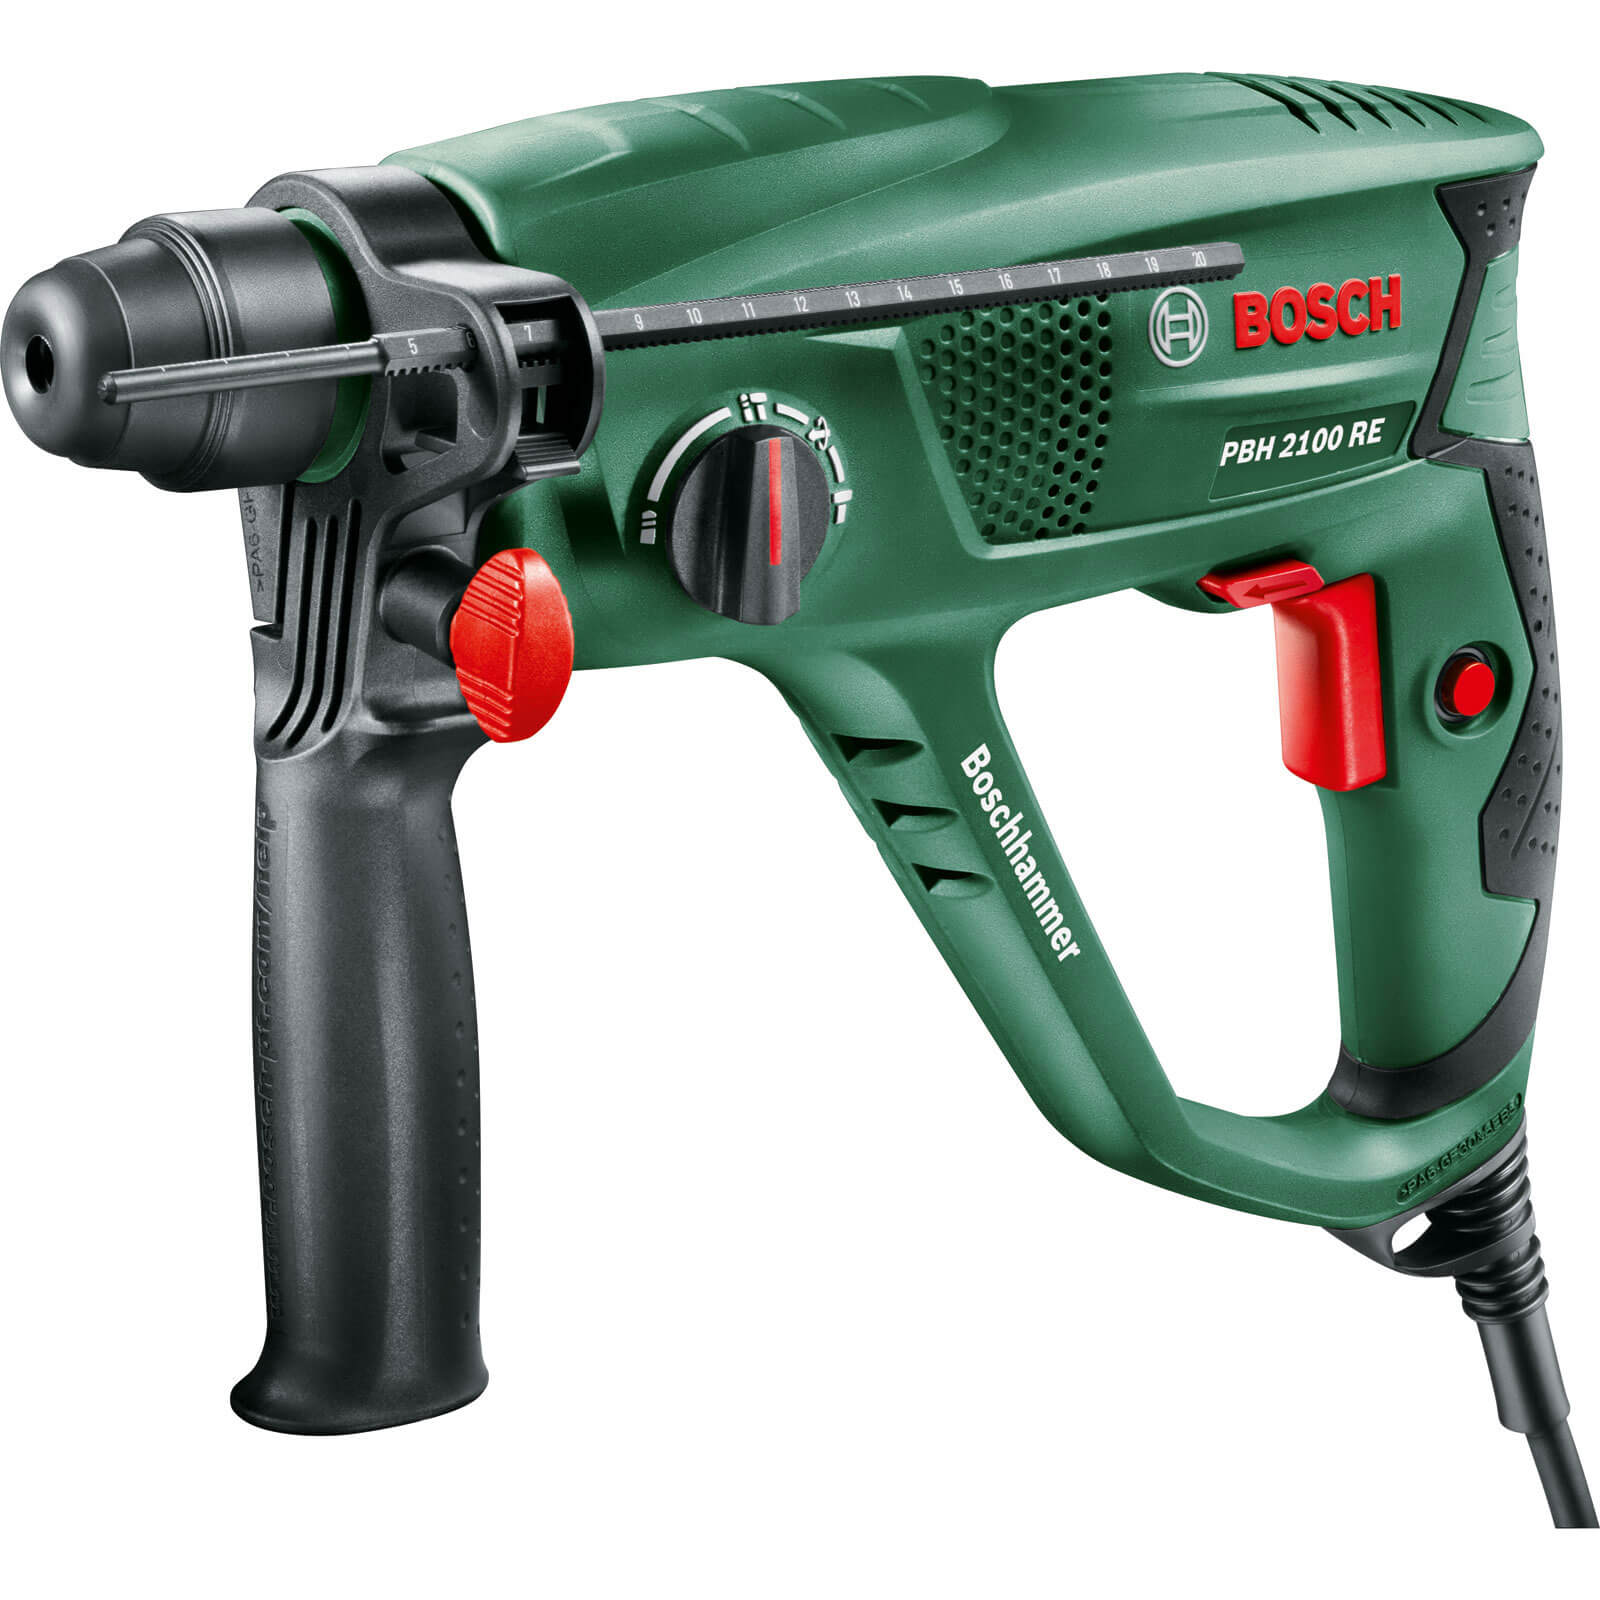 Photo of Bosch Pbh 2100 Re Compact Sds Plus Hammer Drill 240v